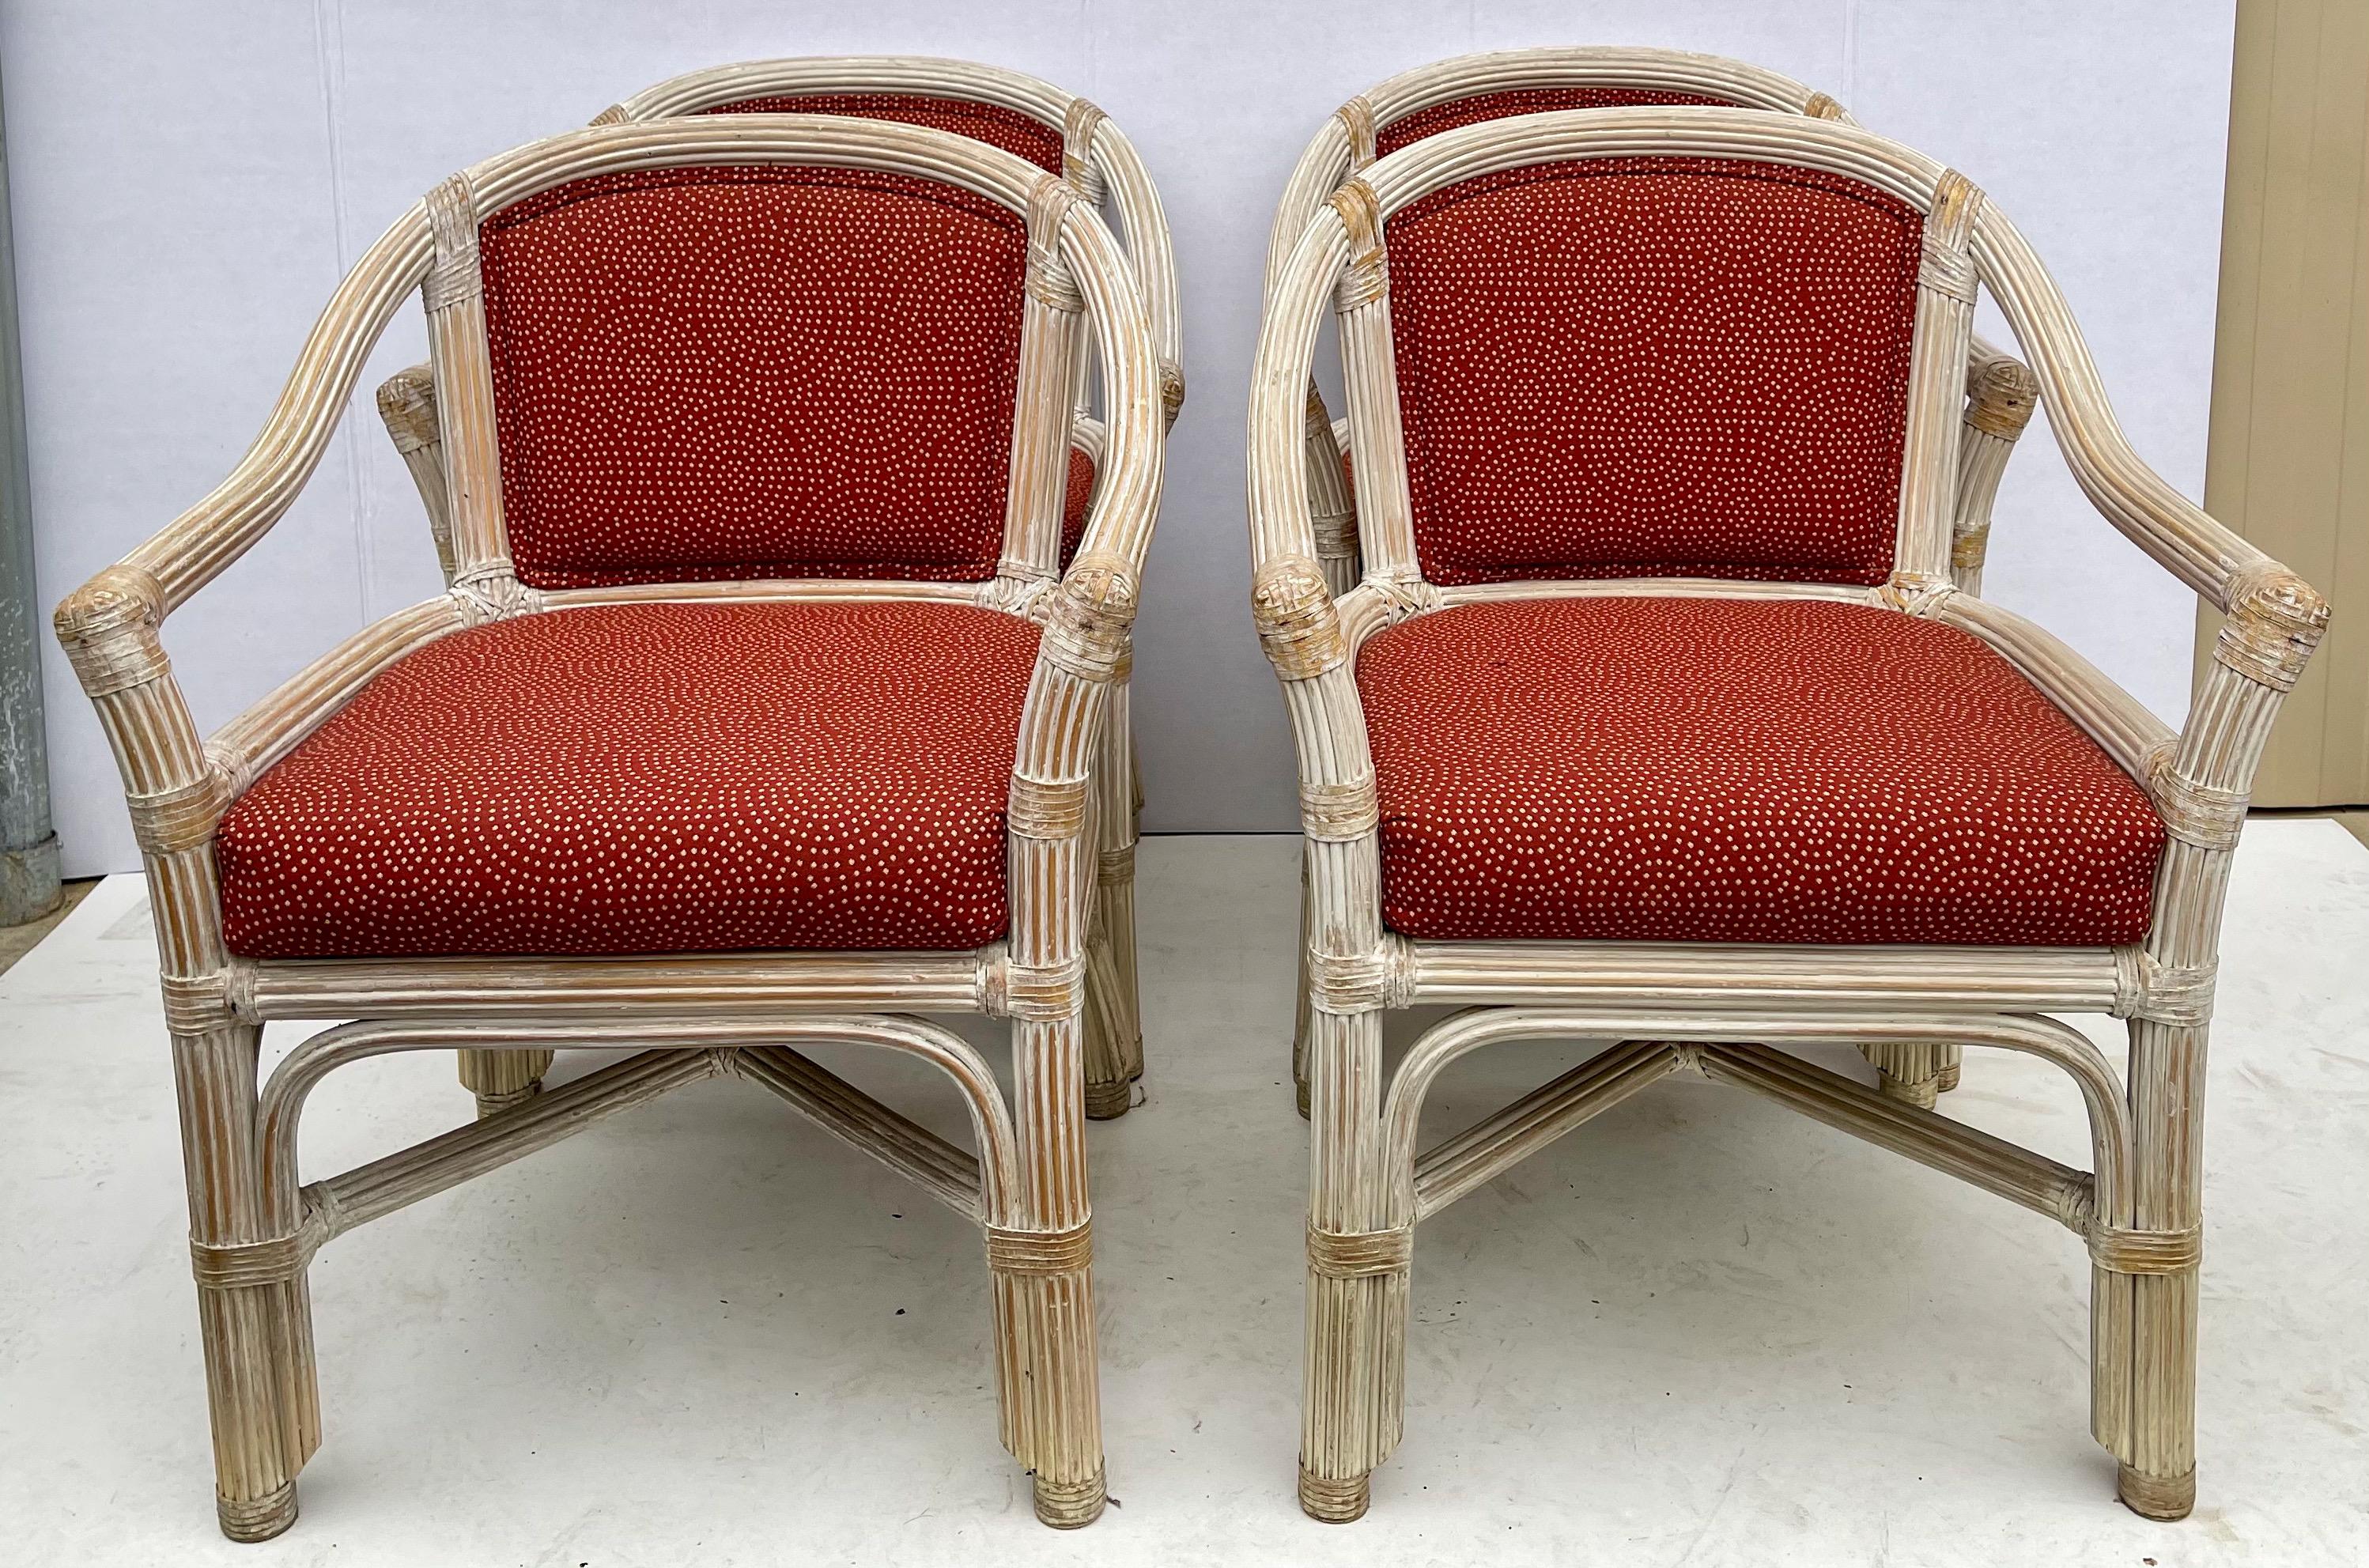 Bohemian 1970s Cerused Reeded Pencil Bamboo Chairs By Henry Link - S/4 For Sale